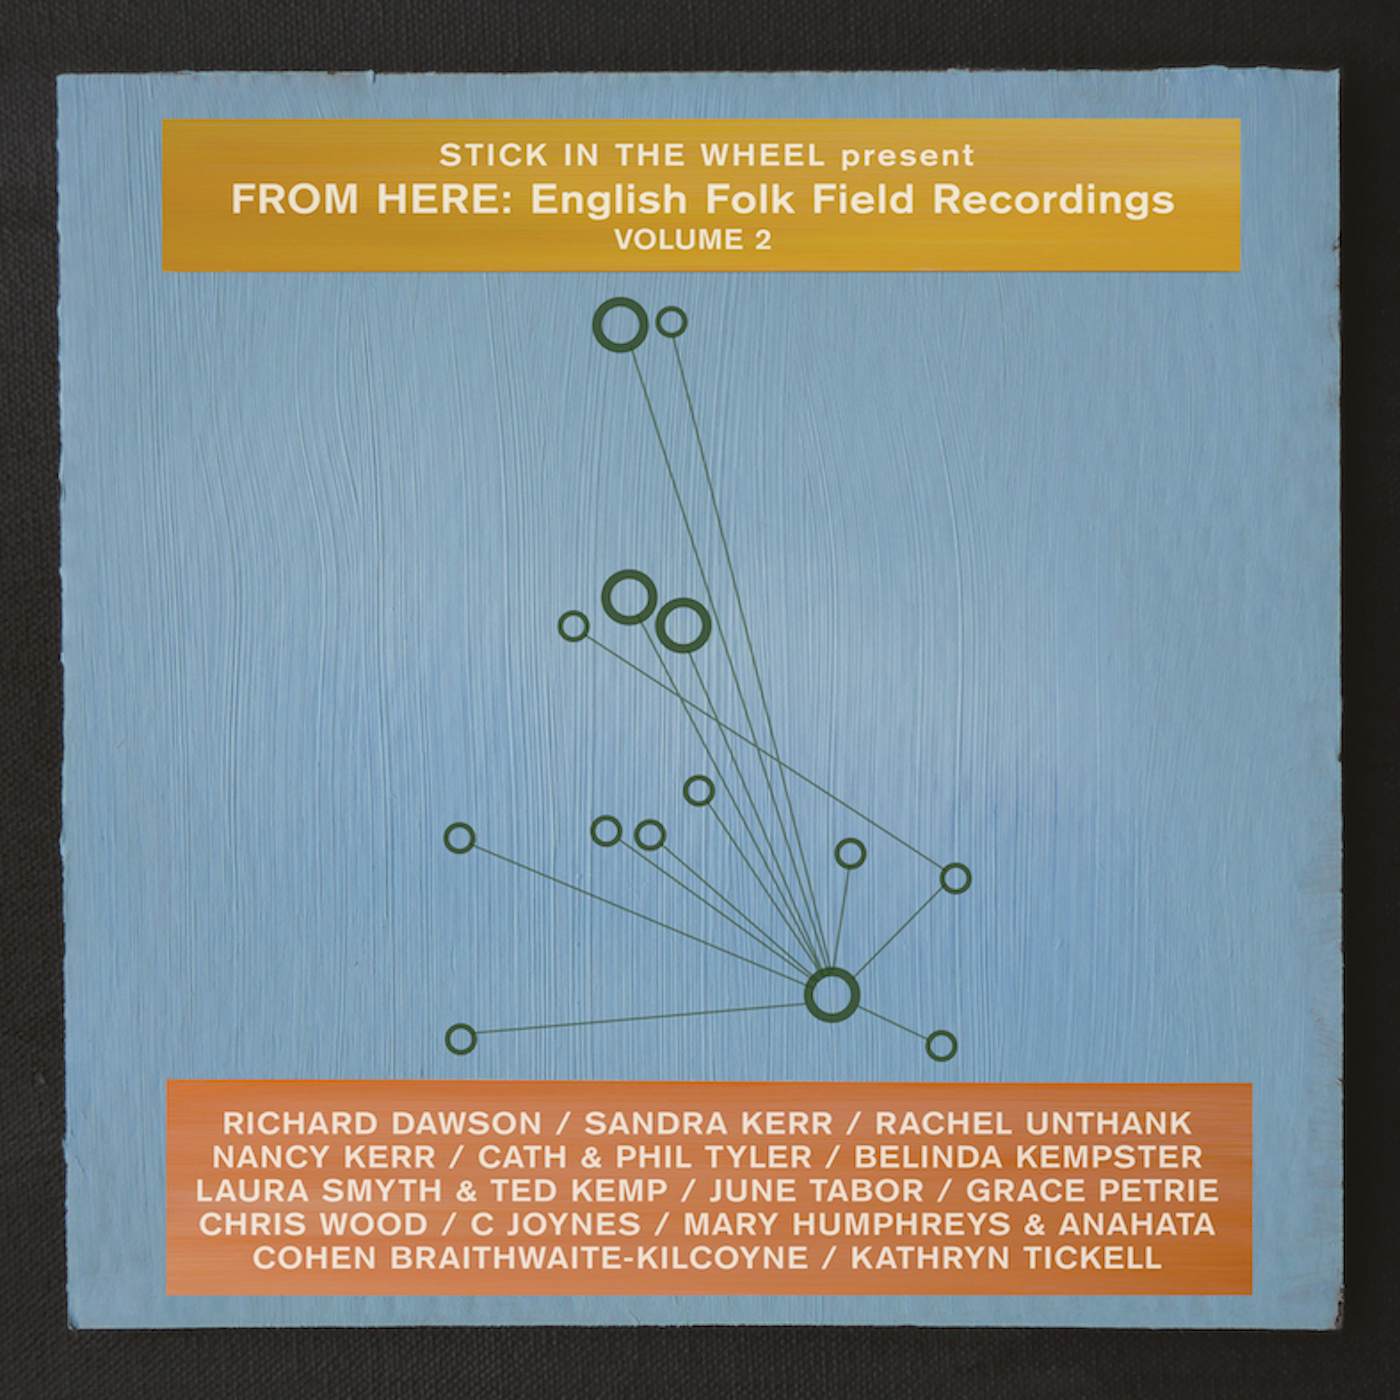 Stick In The Wheel Presents FROM HERE: ENGLISH FOLK FIELD RECORDINGS VOL. 2 CD